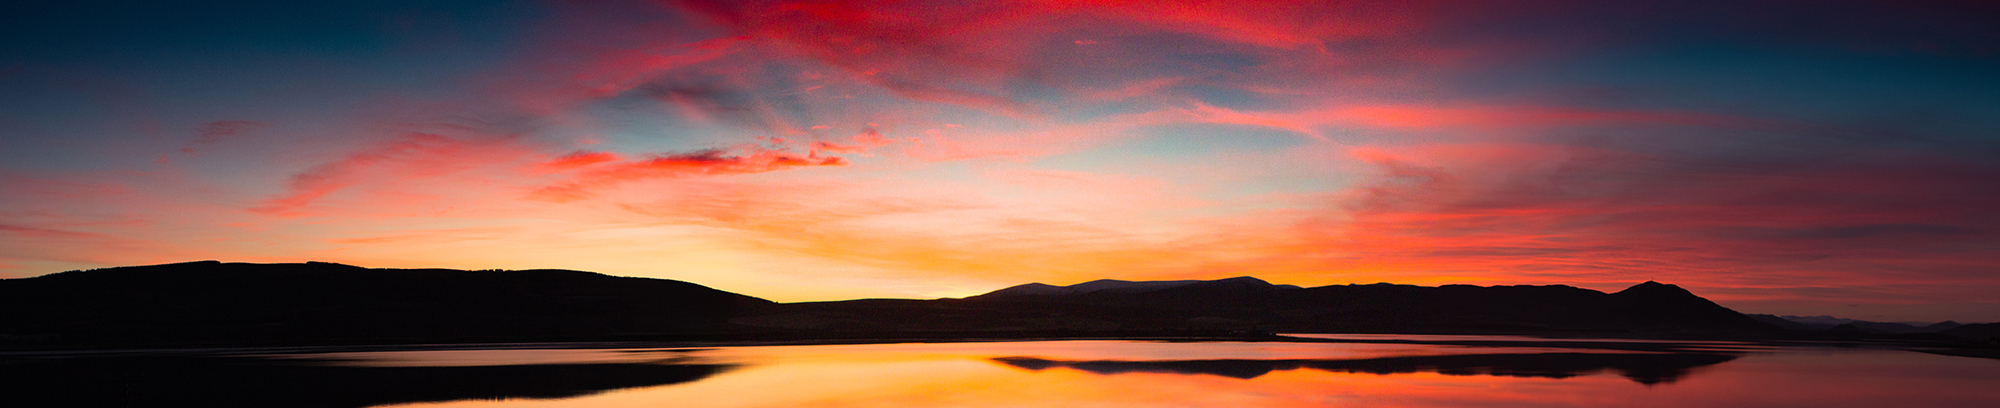 Sunset over the Dornoch Firth